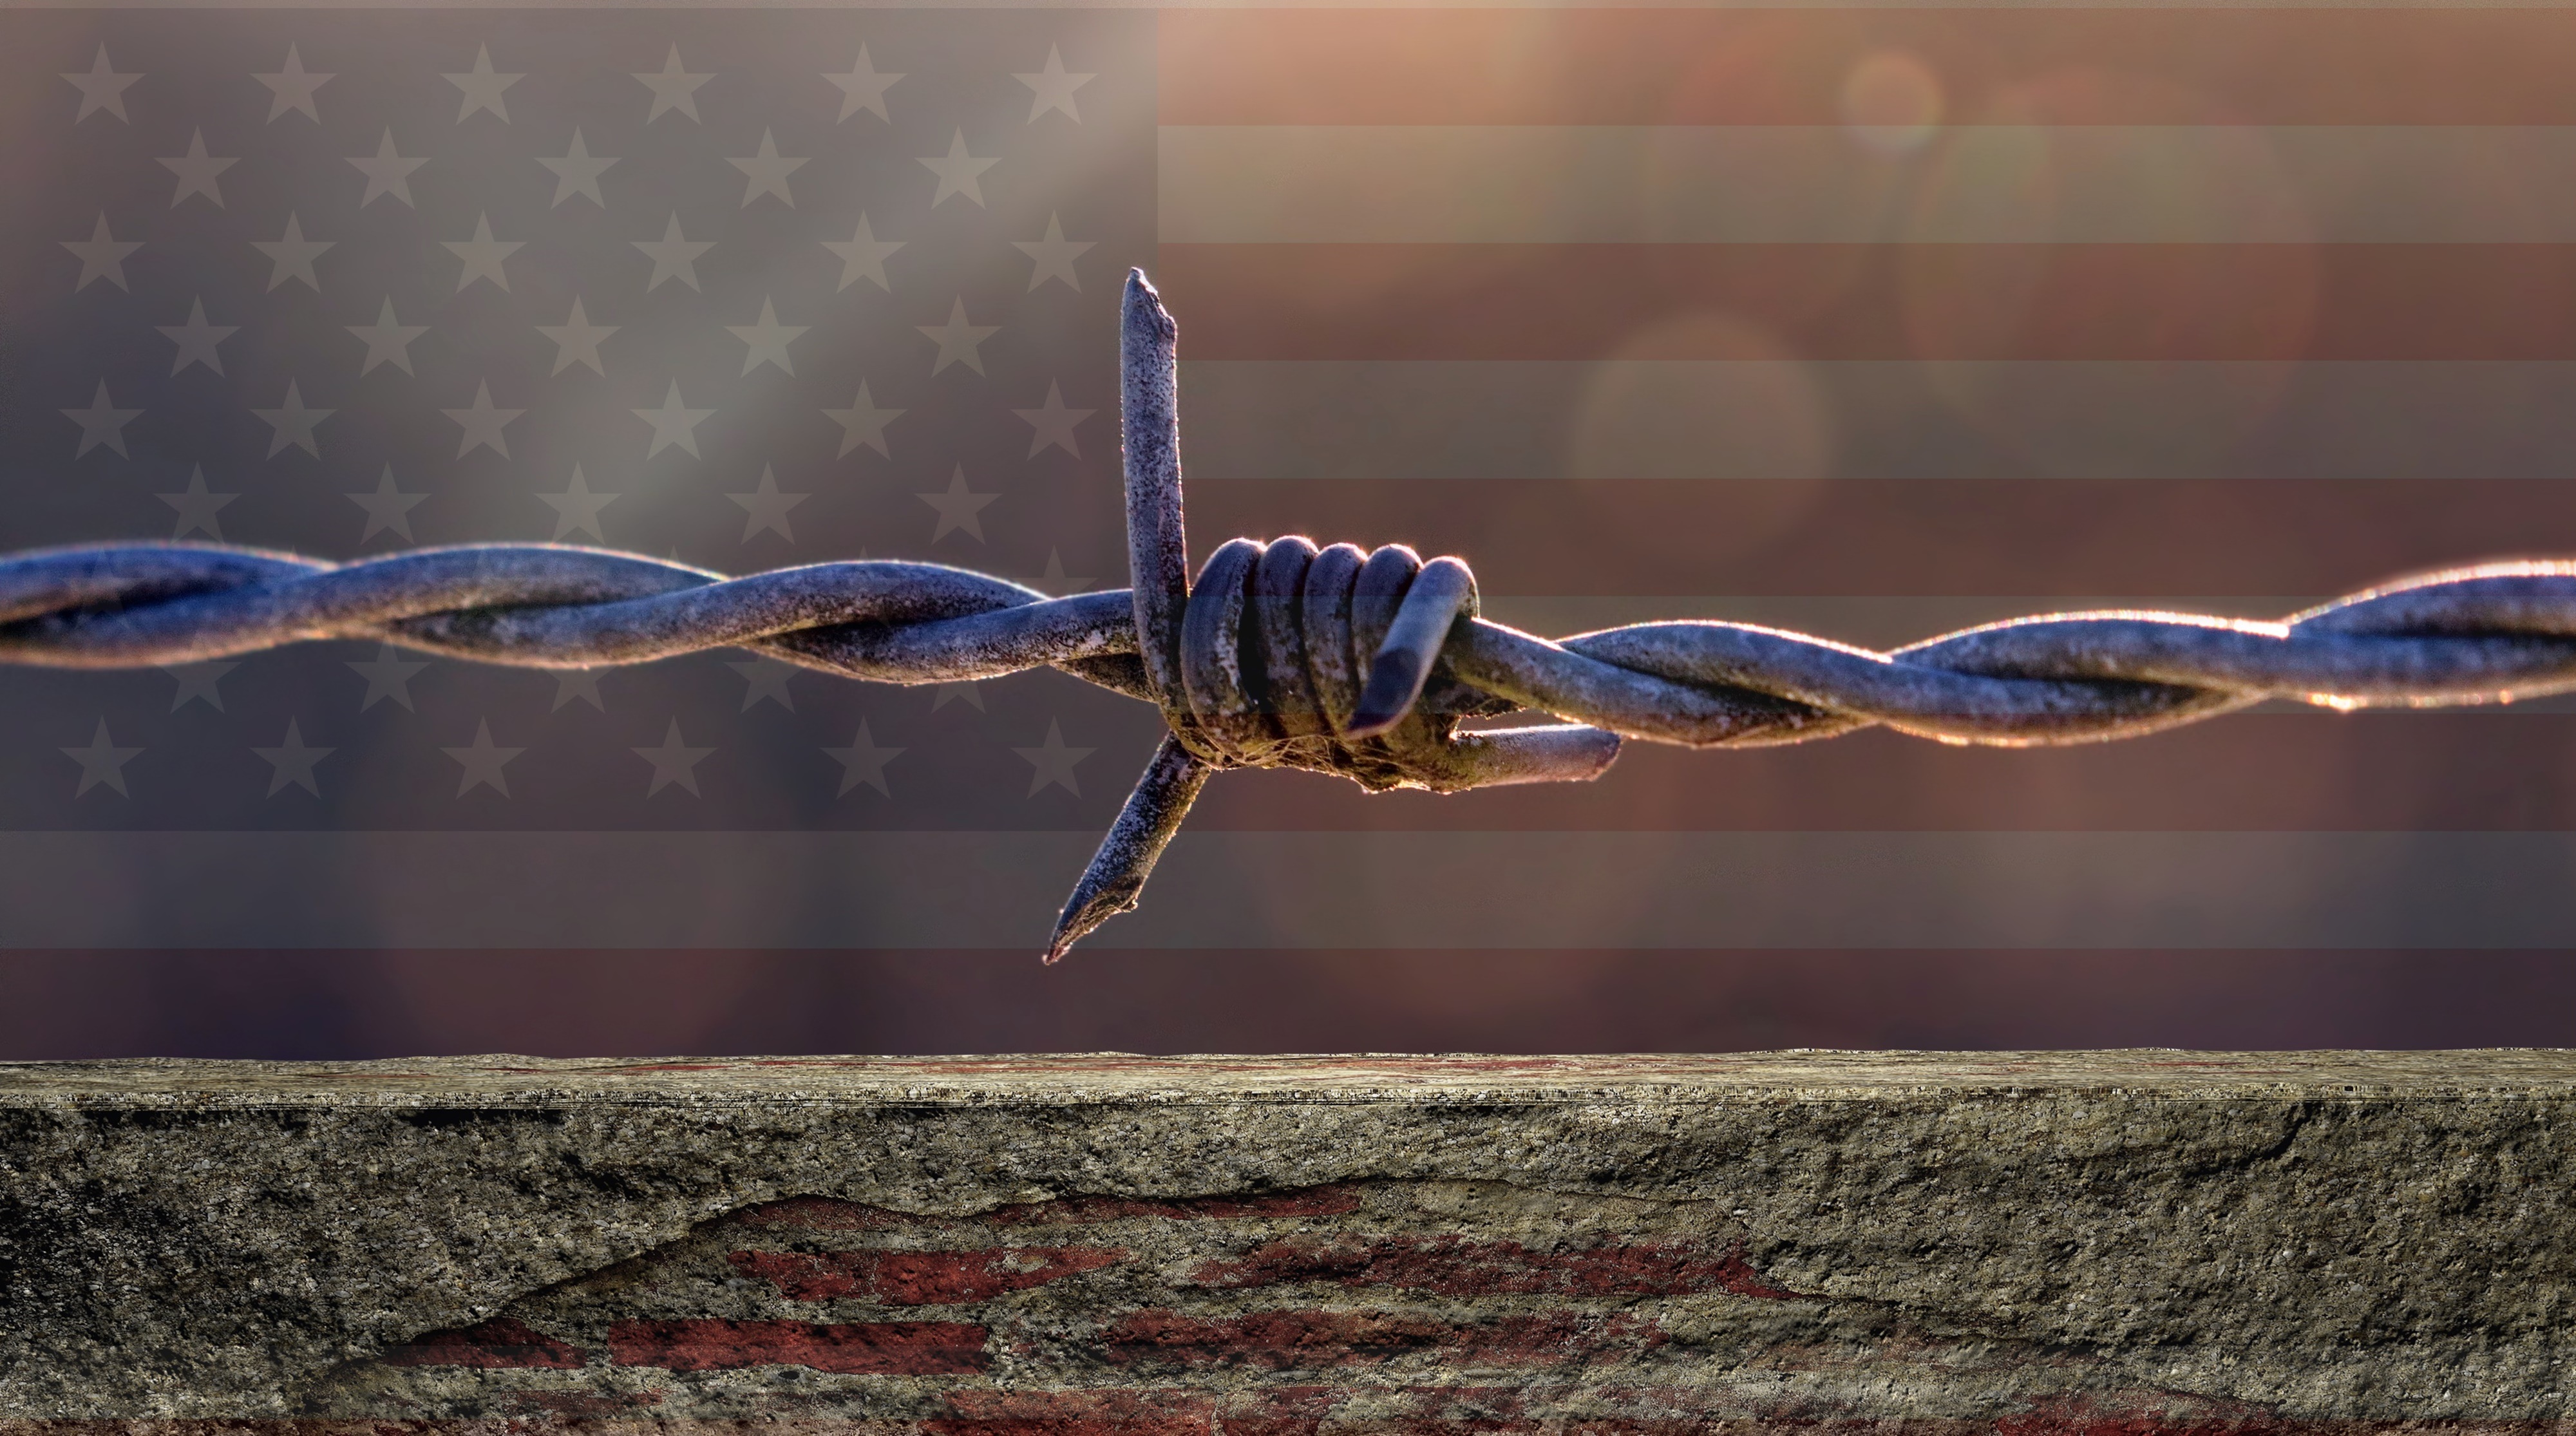 A wall topped with a strand of barbed wire, with a shadowy American flag in the distant background.